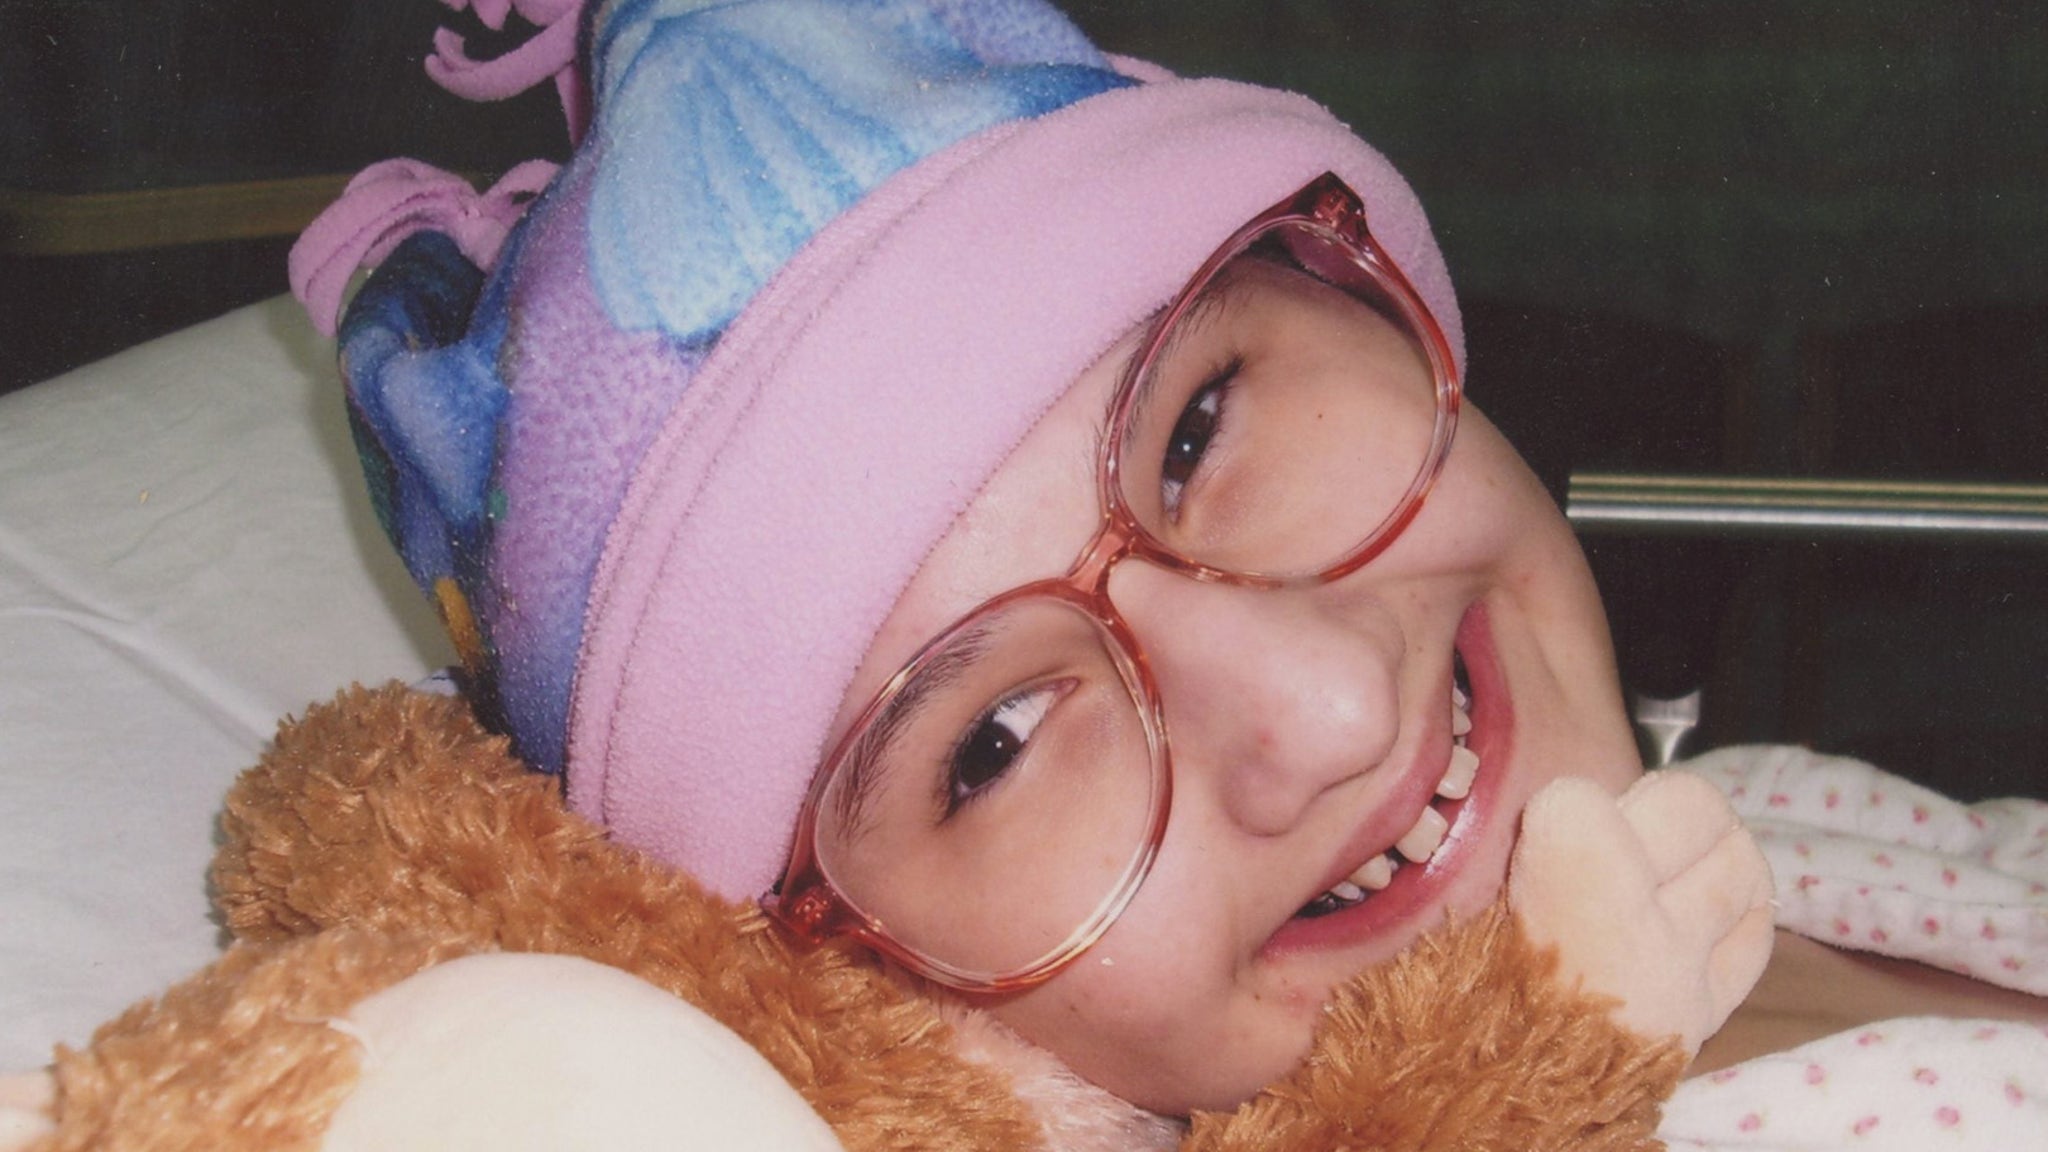 Gypsy Rose Blanchard Claims Grandfather Sexually Abused Her In New Docuseries